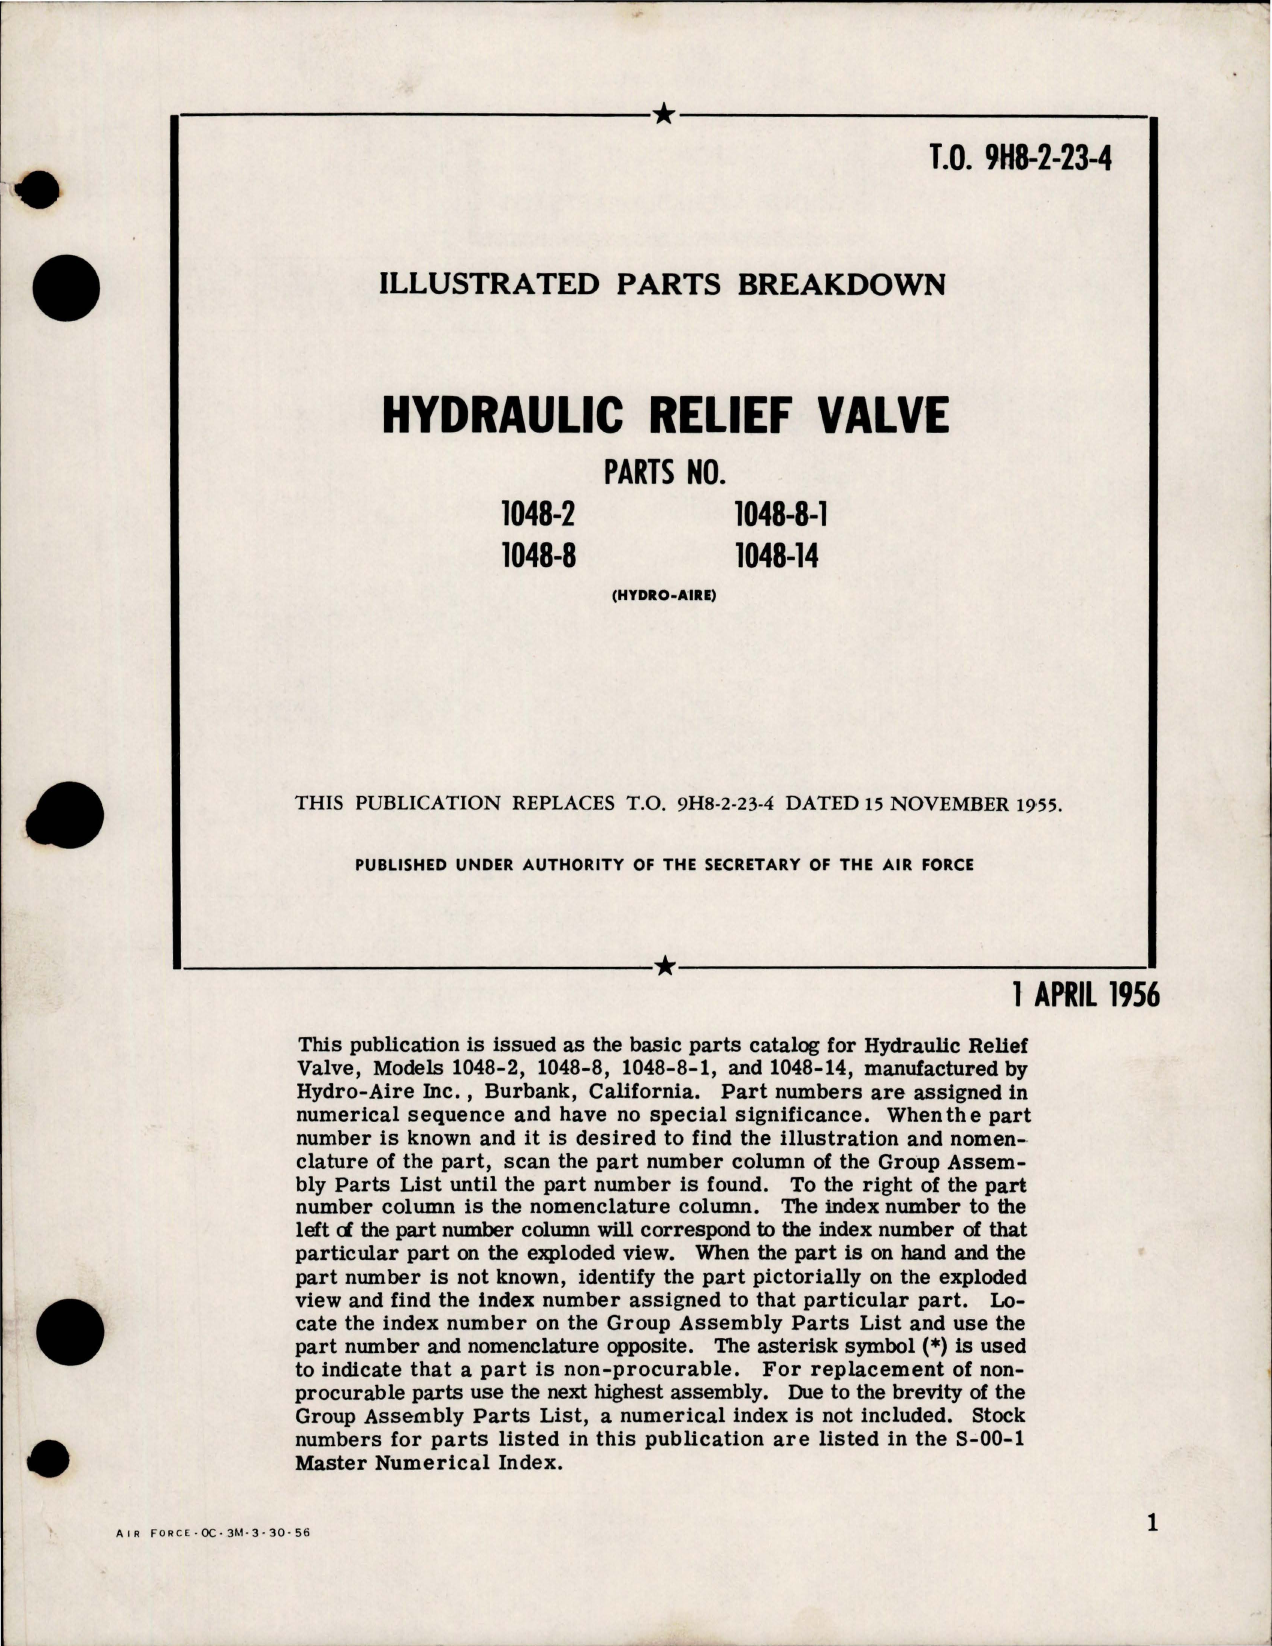 Sample page 1 from AirCorps Library document: Illustrated Parts Breakdown for Hydraulic Relief Valve - Parts 1048-2, 1048-8, 1048-8-1 and 1048-14